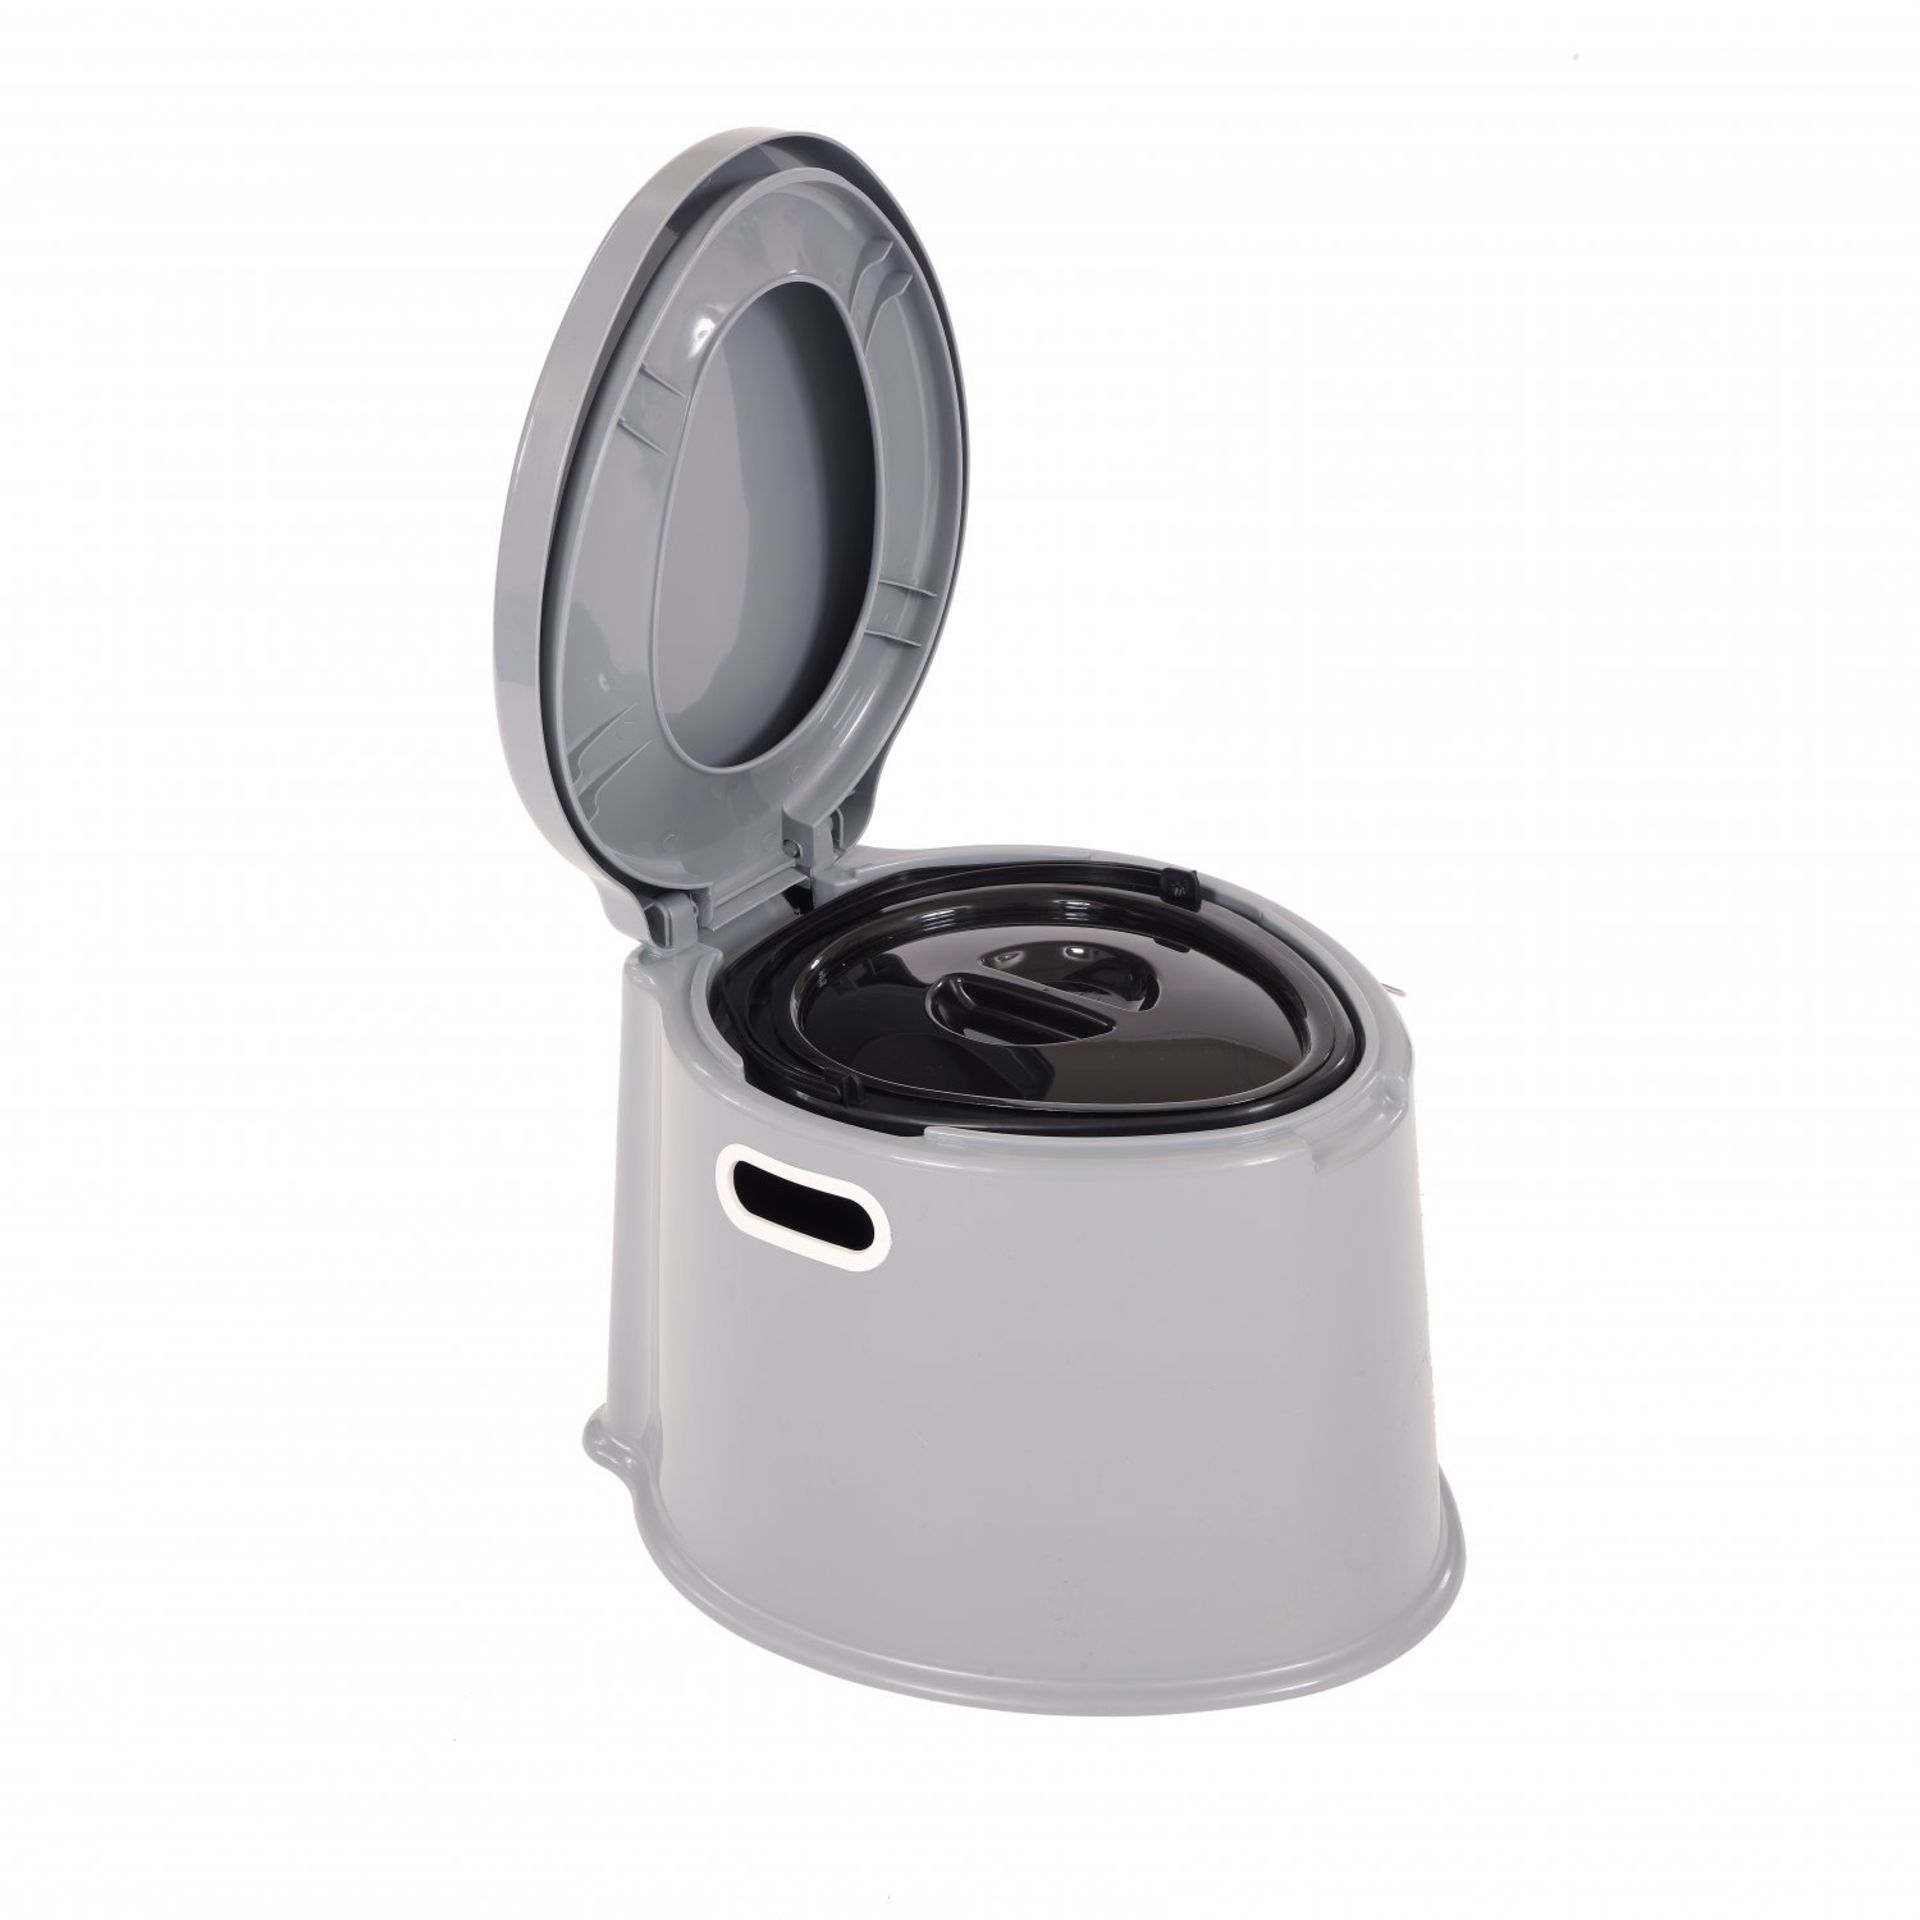 (G4) 5L Portable Compact Camping Toilet Potty with Removable Bucket Dimensions: 43 x 39 x 34cm... - Image 3 of 3